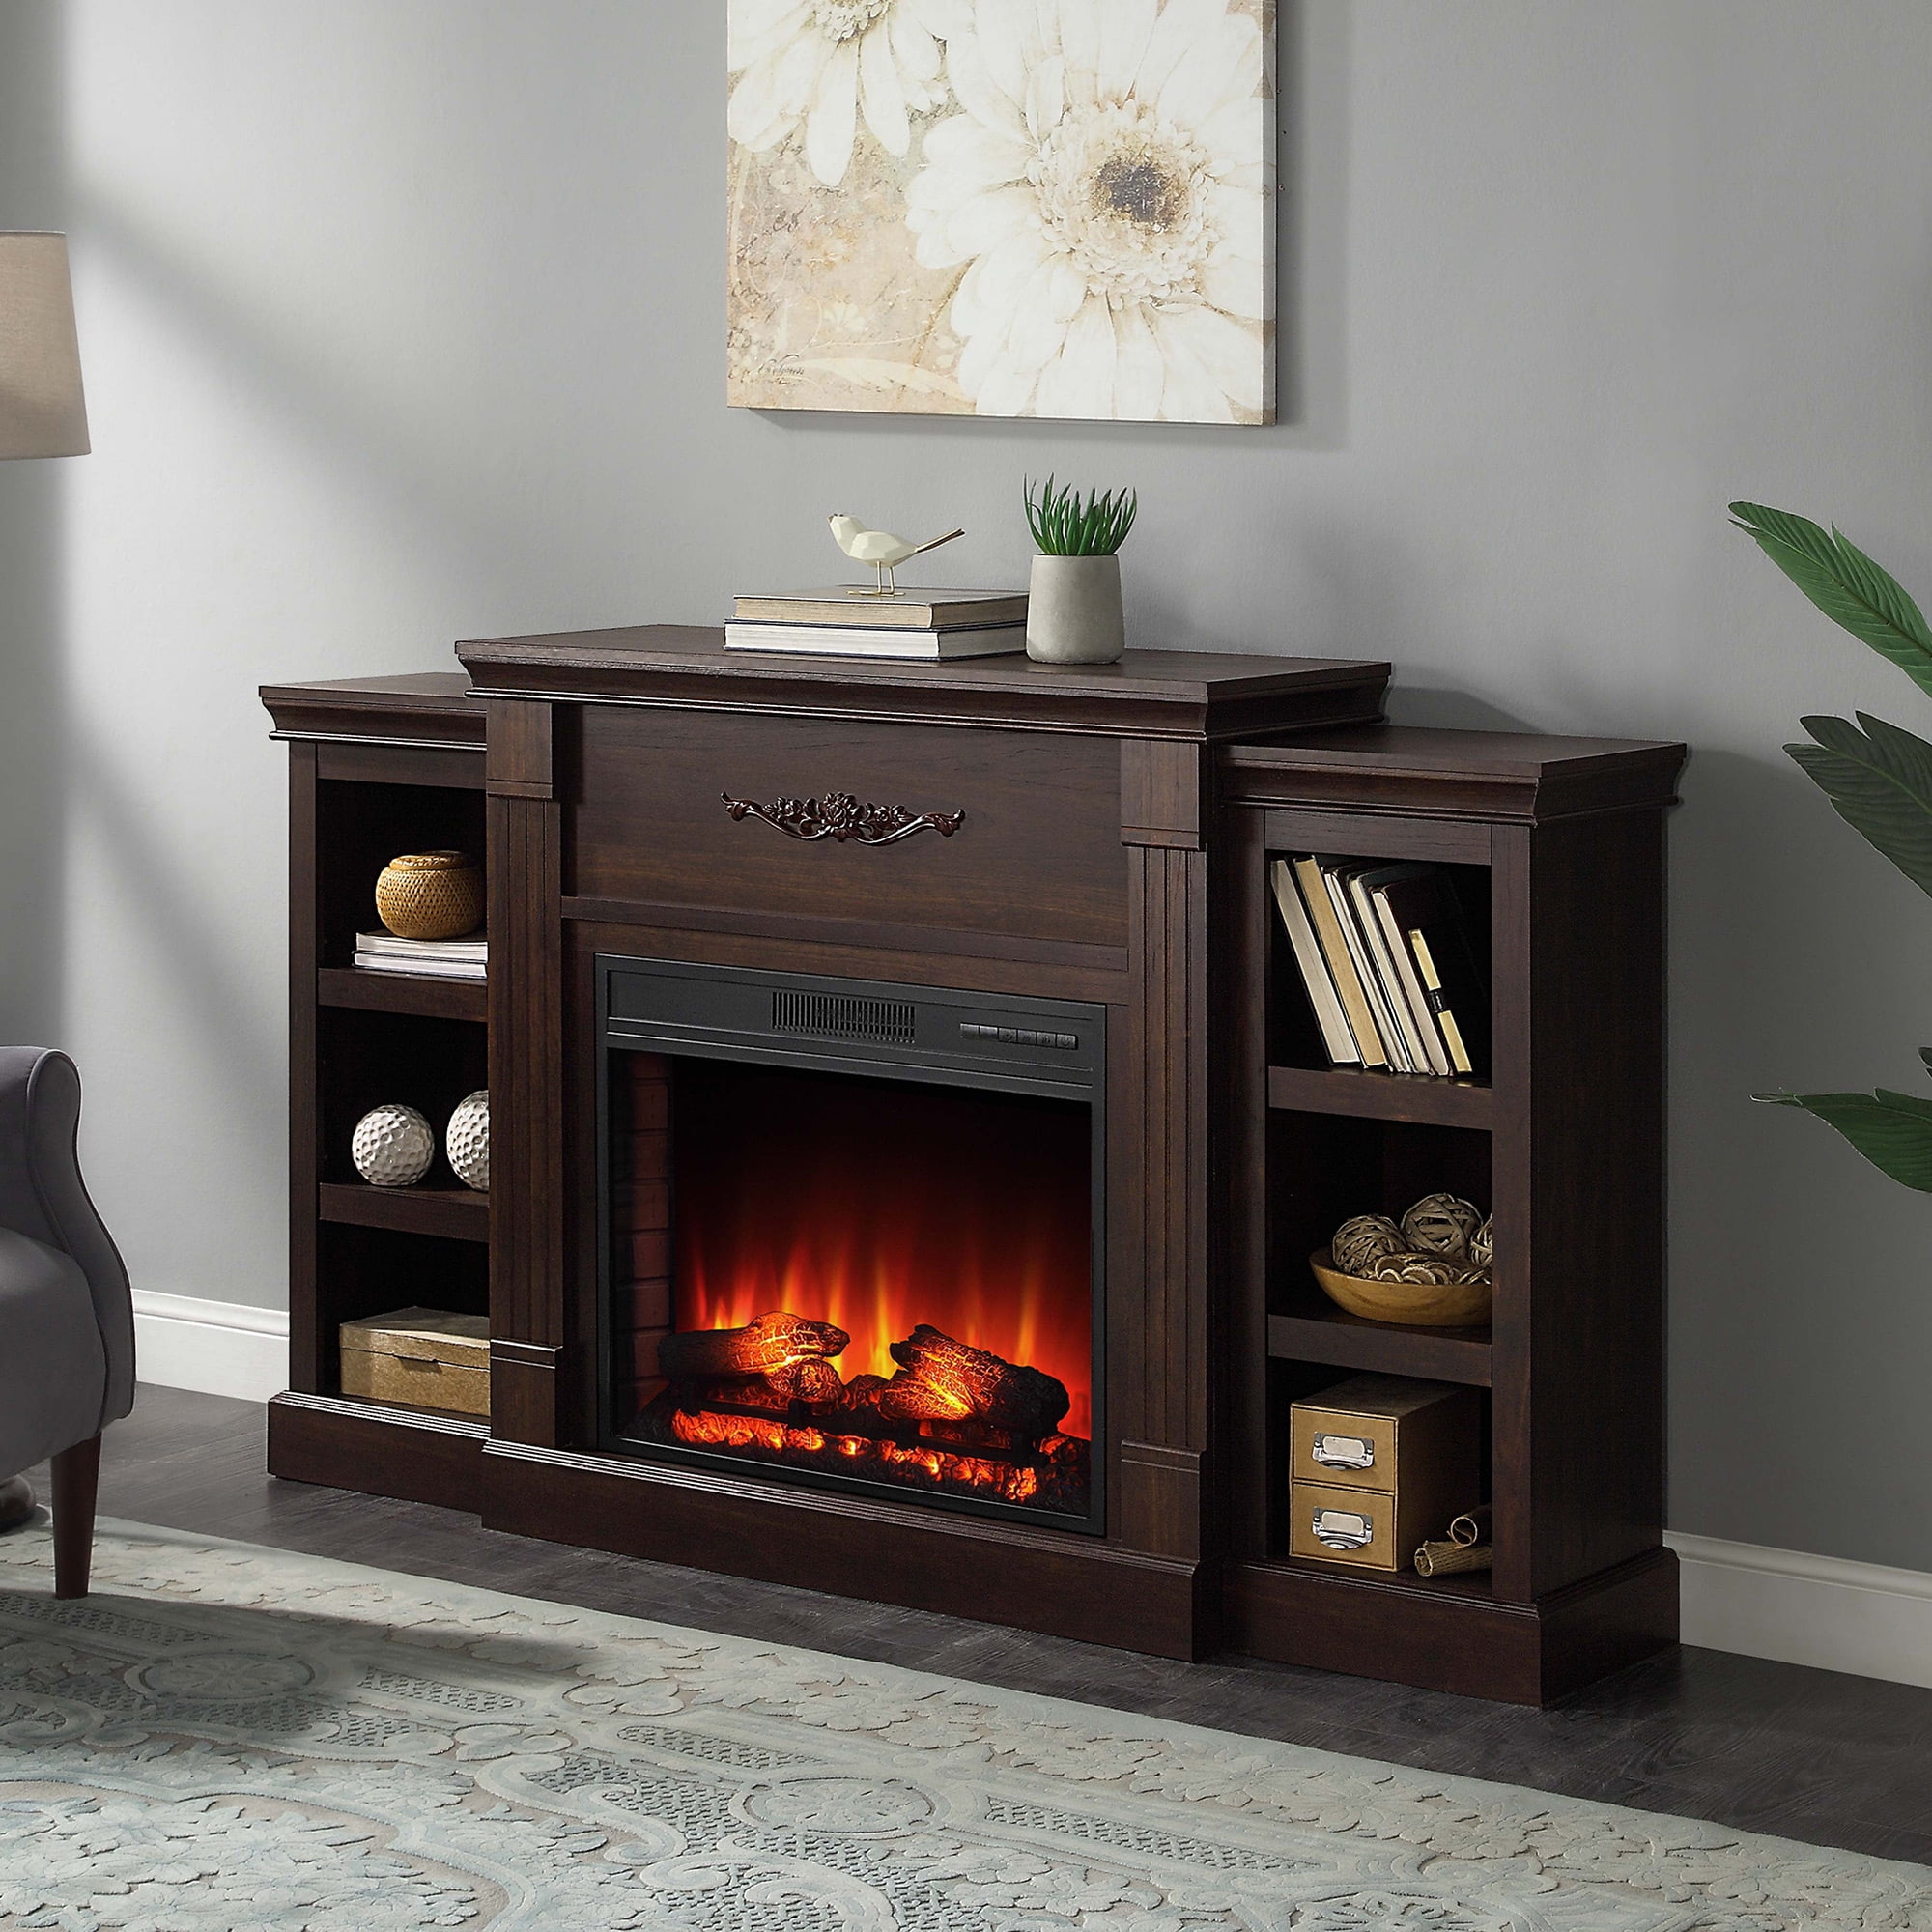 Belleze 70 Mantel Brown Electric, Electric Fireplace With Hearth And Mantel